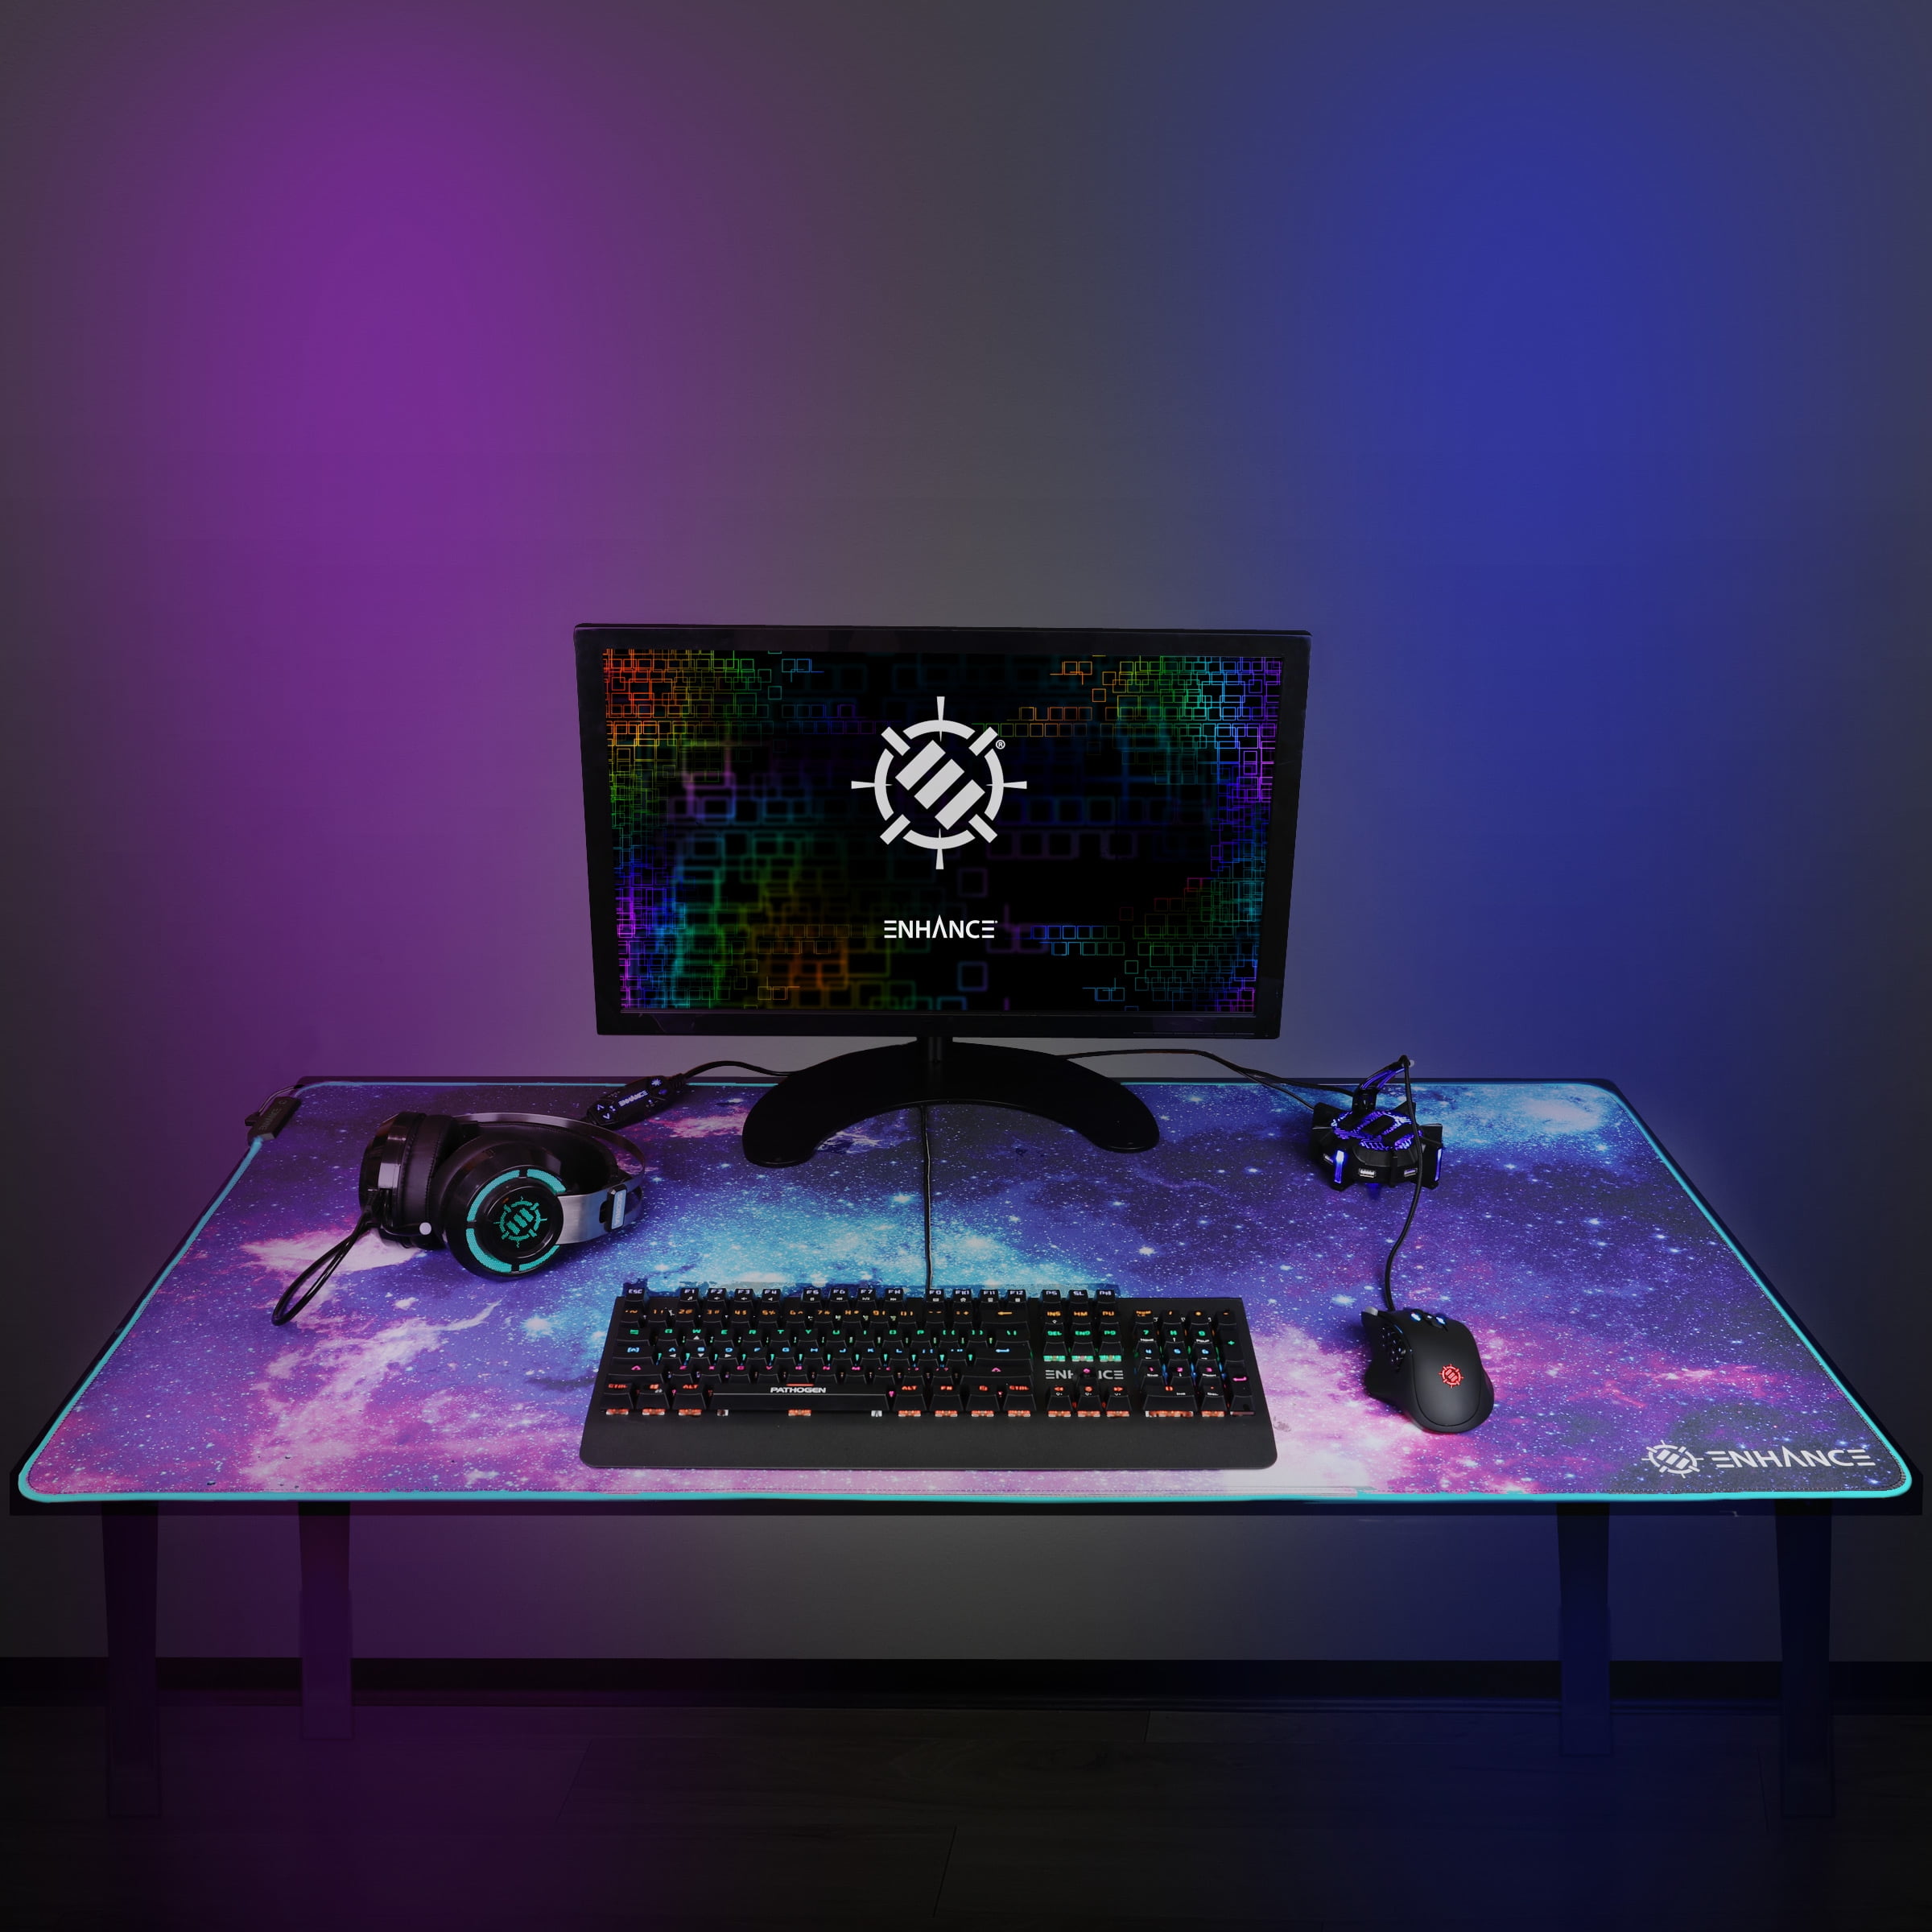  3XL Huge Mouse Pads Oversized (48''x24'') - Extra Large Gaming  XXXL Mousepad for Full Desk - Super Thick Nonslip Rubber Base and  Waterproof Desktop Keyboard Extended Mouse Mat (Black, XXX-Large) 